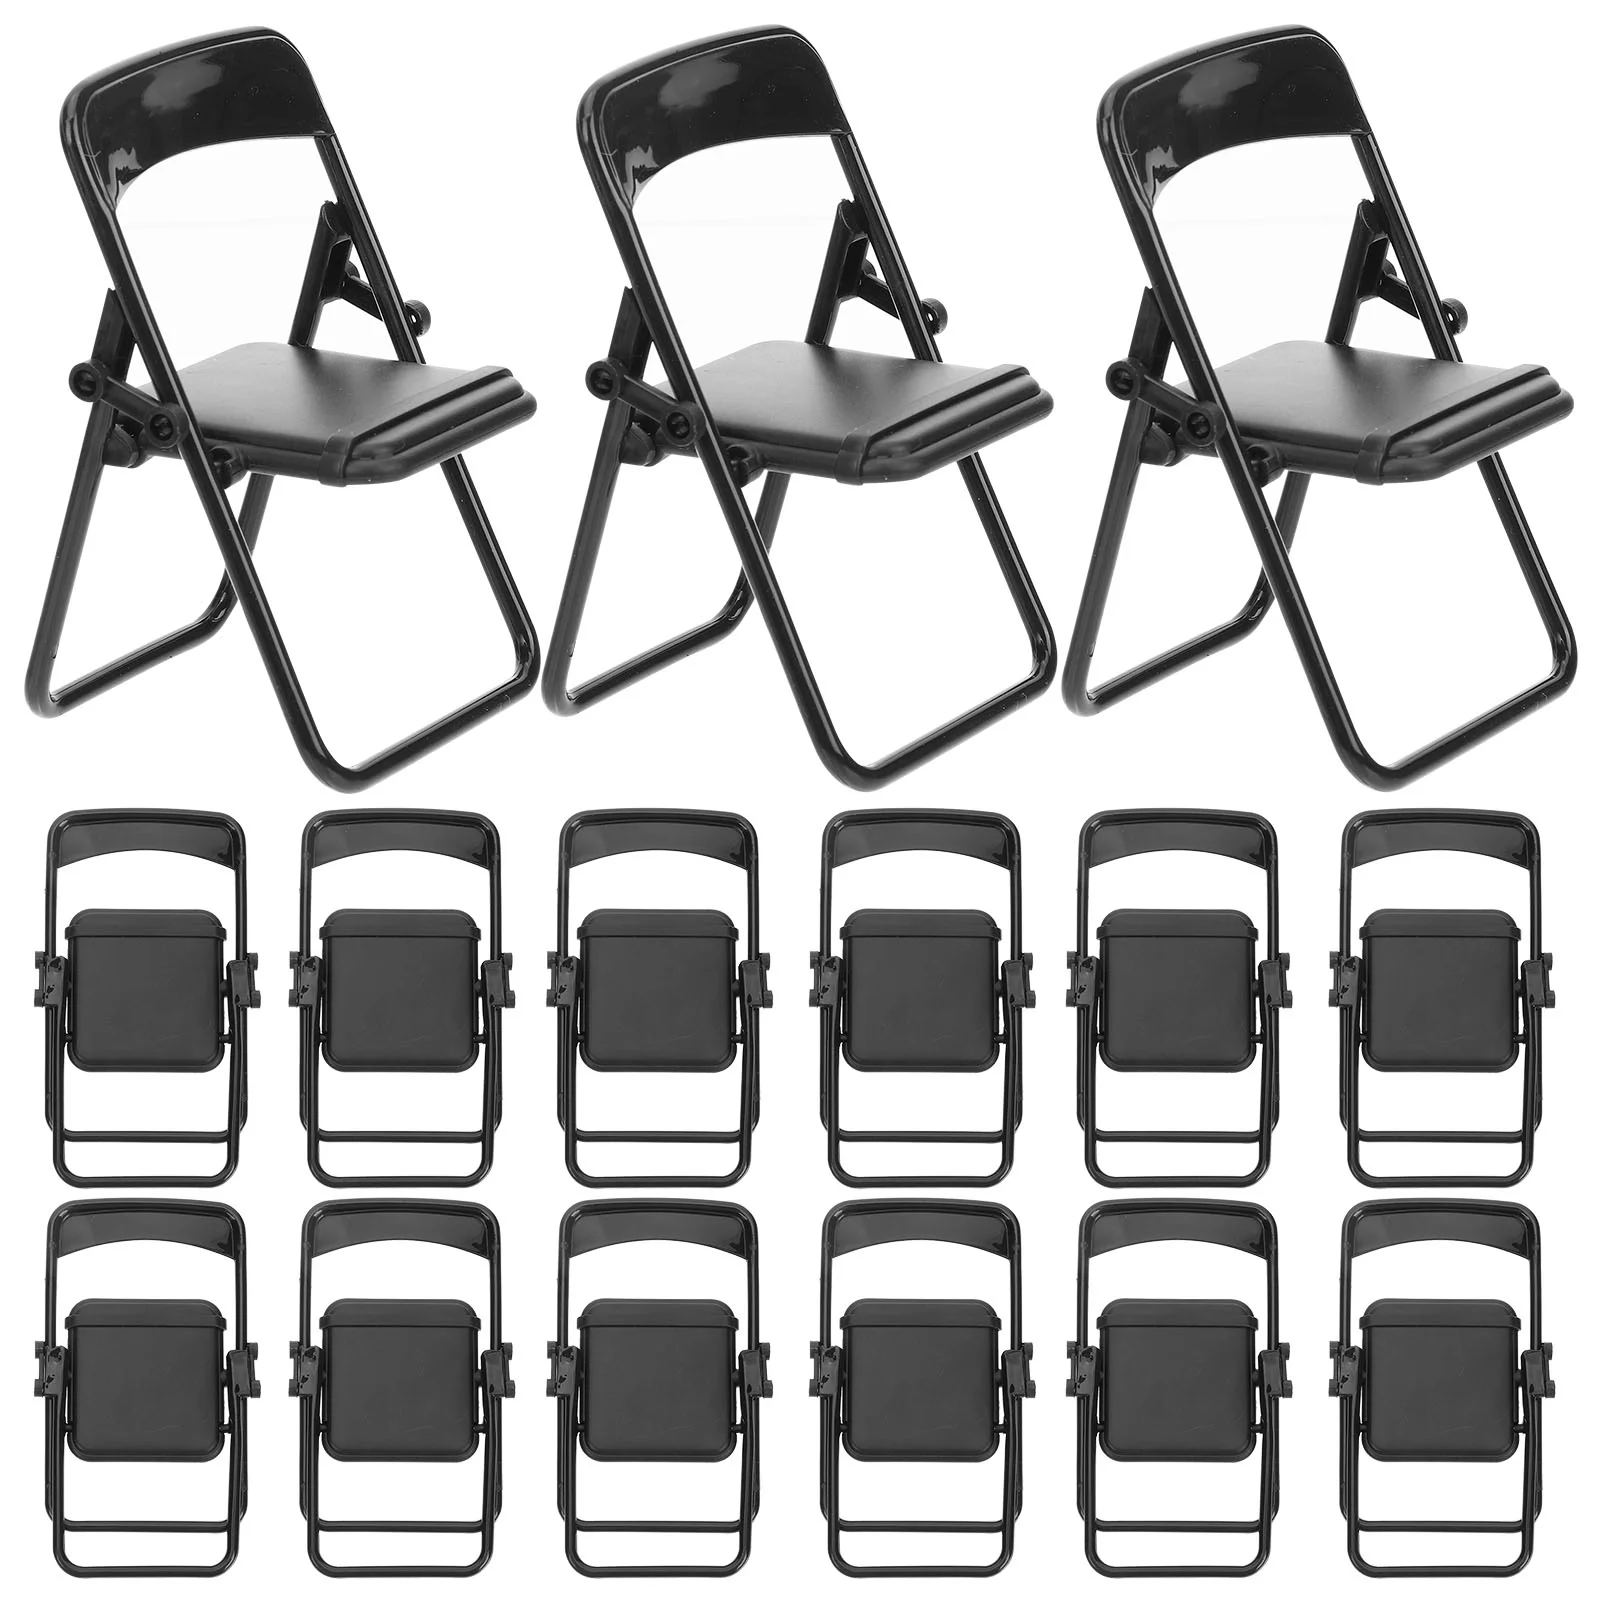 

12pcs Folding Creative Interesting Cell Holders Telephone Holder Stands Miniature Chairs